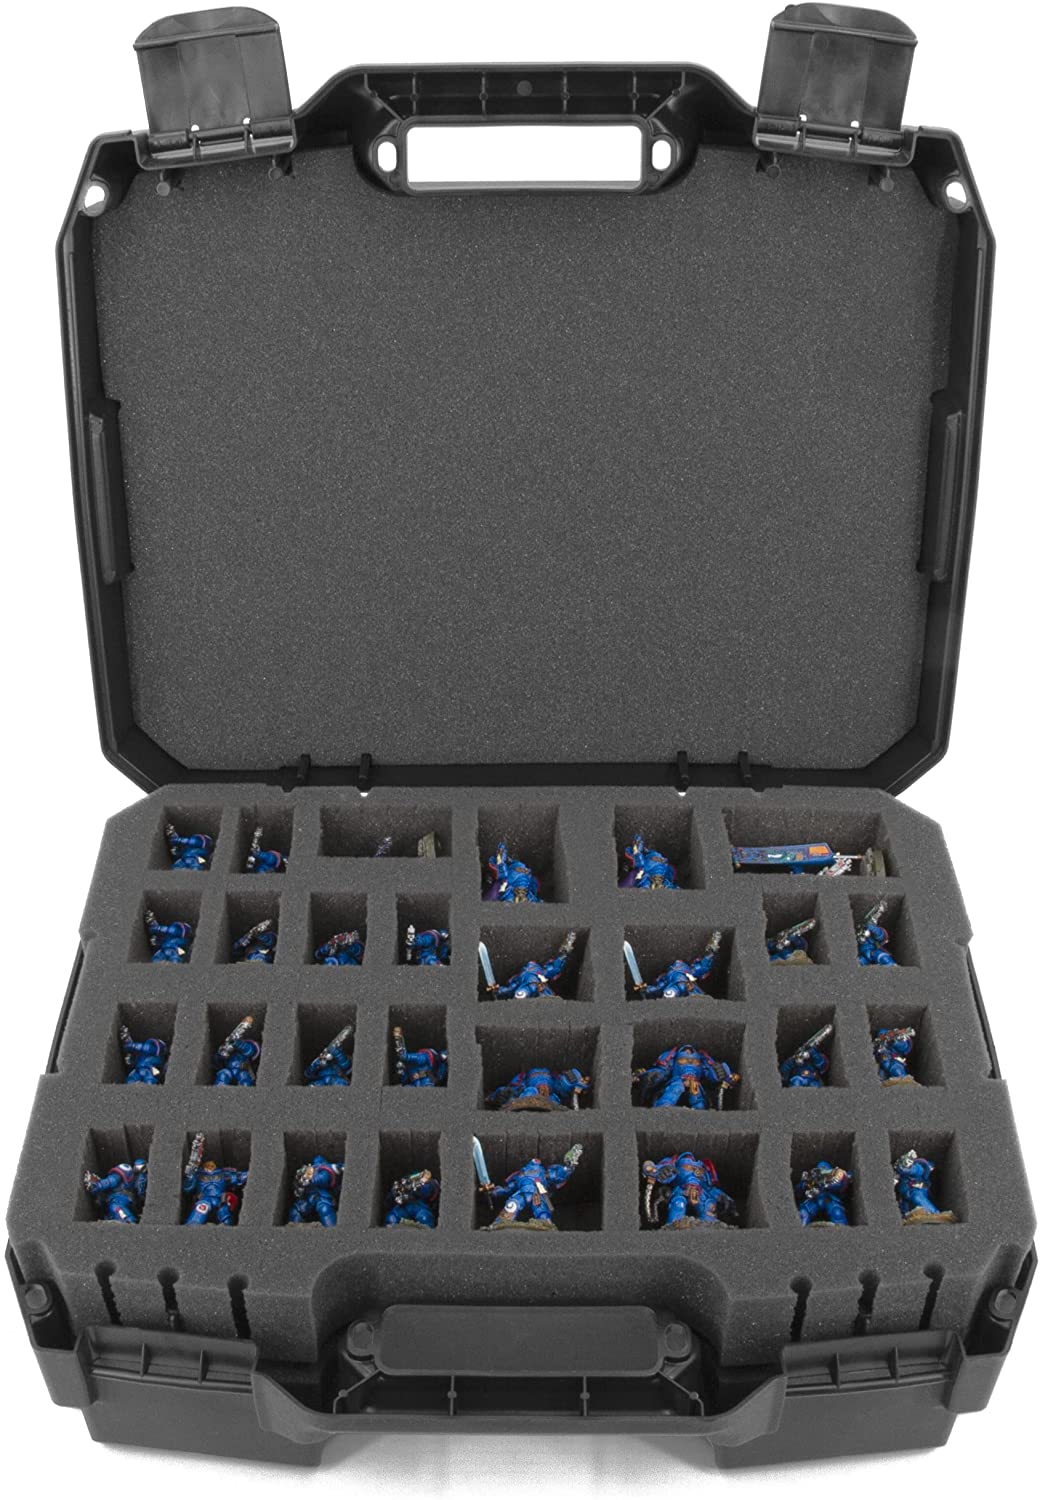 CASEMATIX Miniature Figure Case - 30 Slot Figurine Miniature Carrying Case  for Warhammer 40k, DnD and More - Case Only